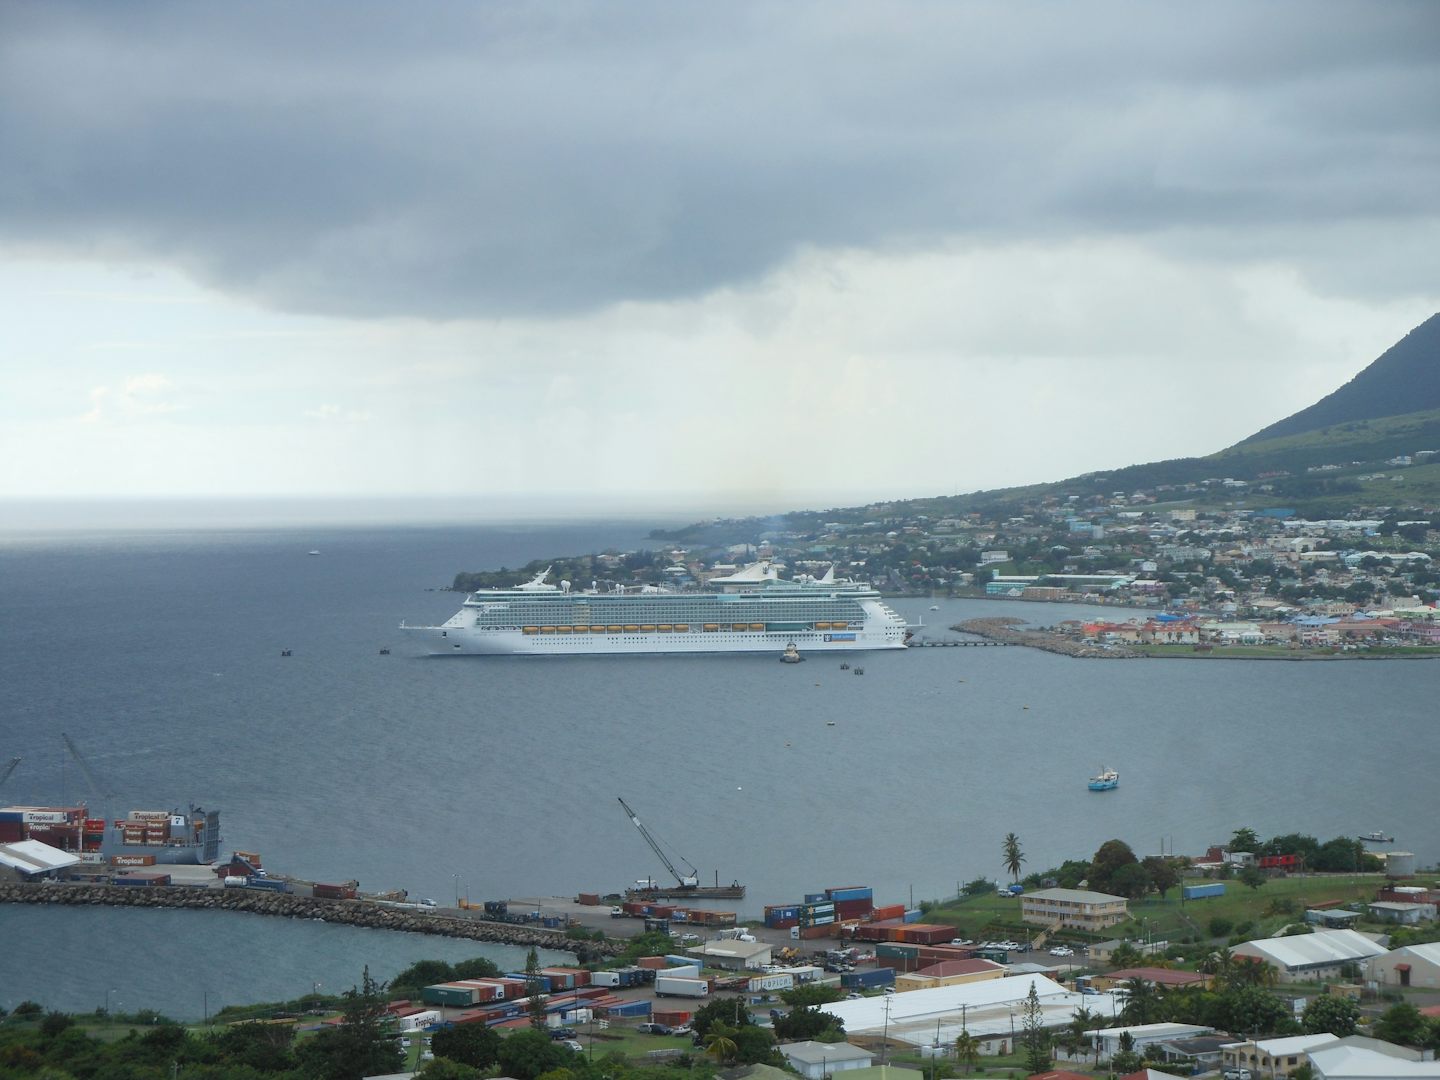 The best view of the Freedom of the Seas and St. Kitts possible! 360 views from this lookout point.